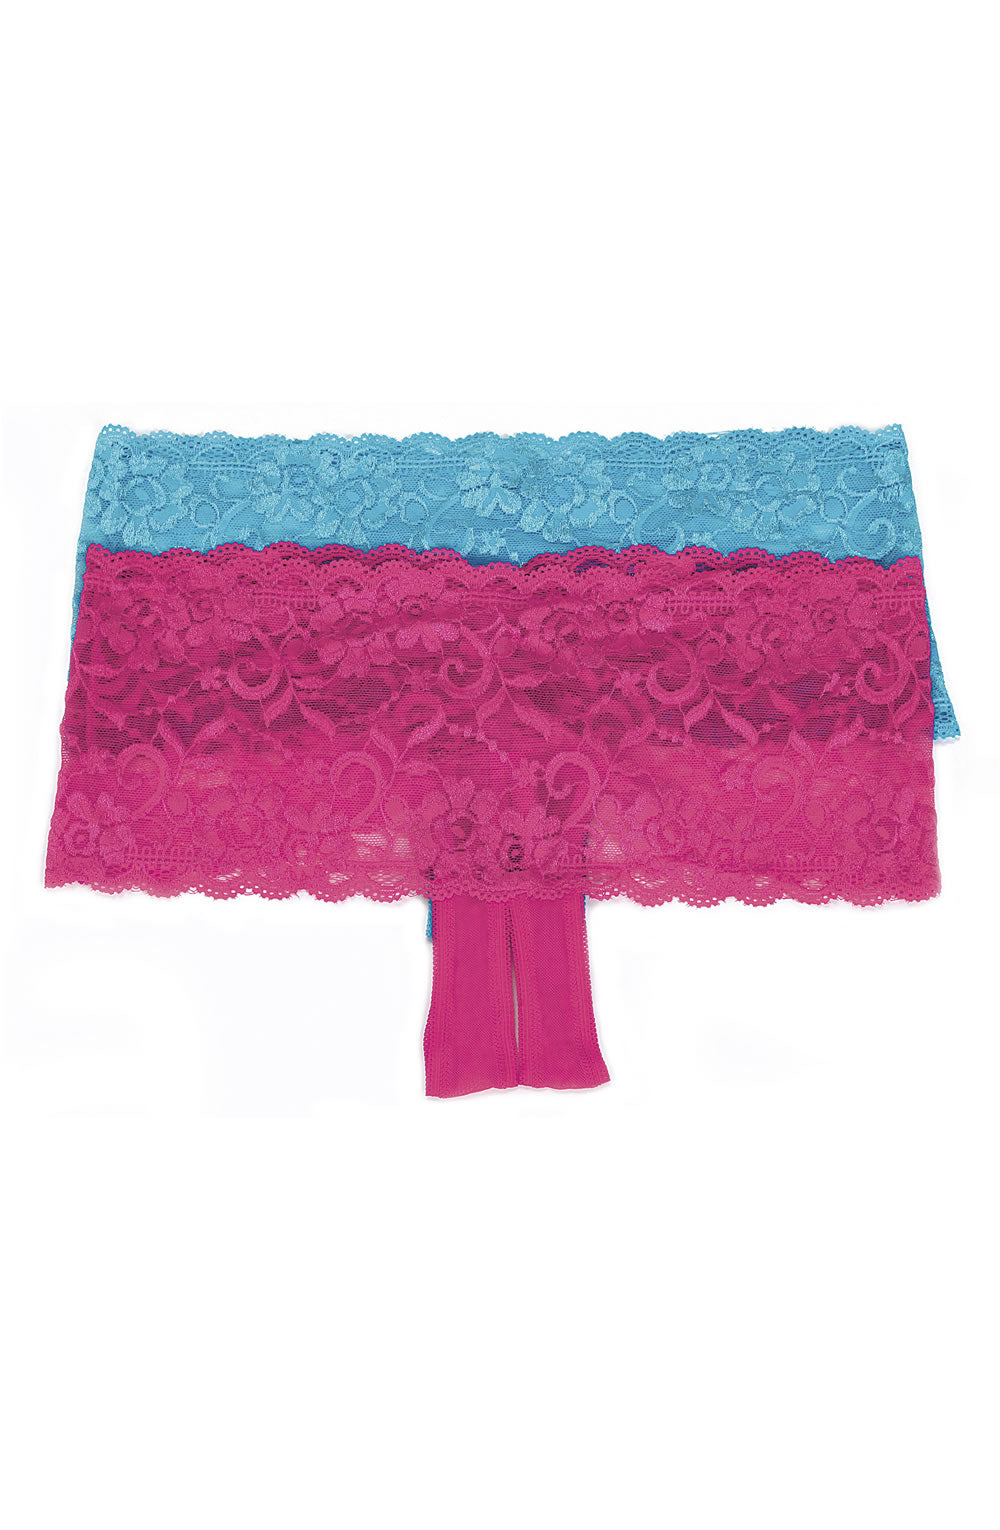 SoH 59 Stretch Lace Boy Short Open Hot Pink